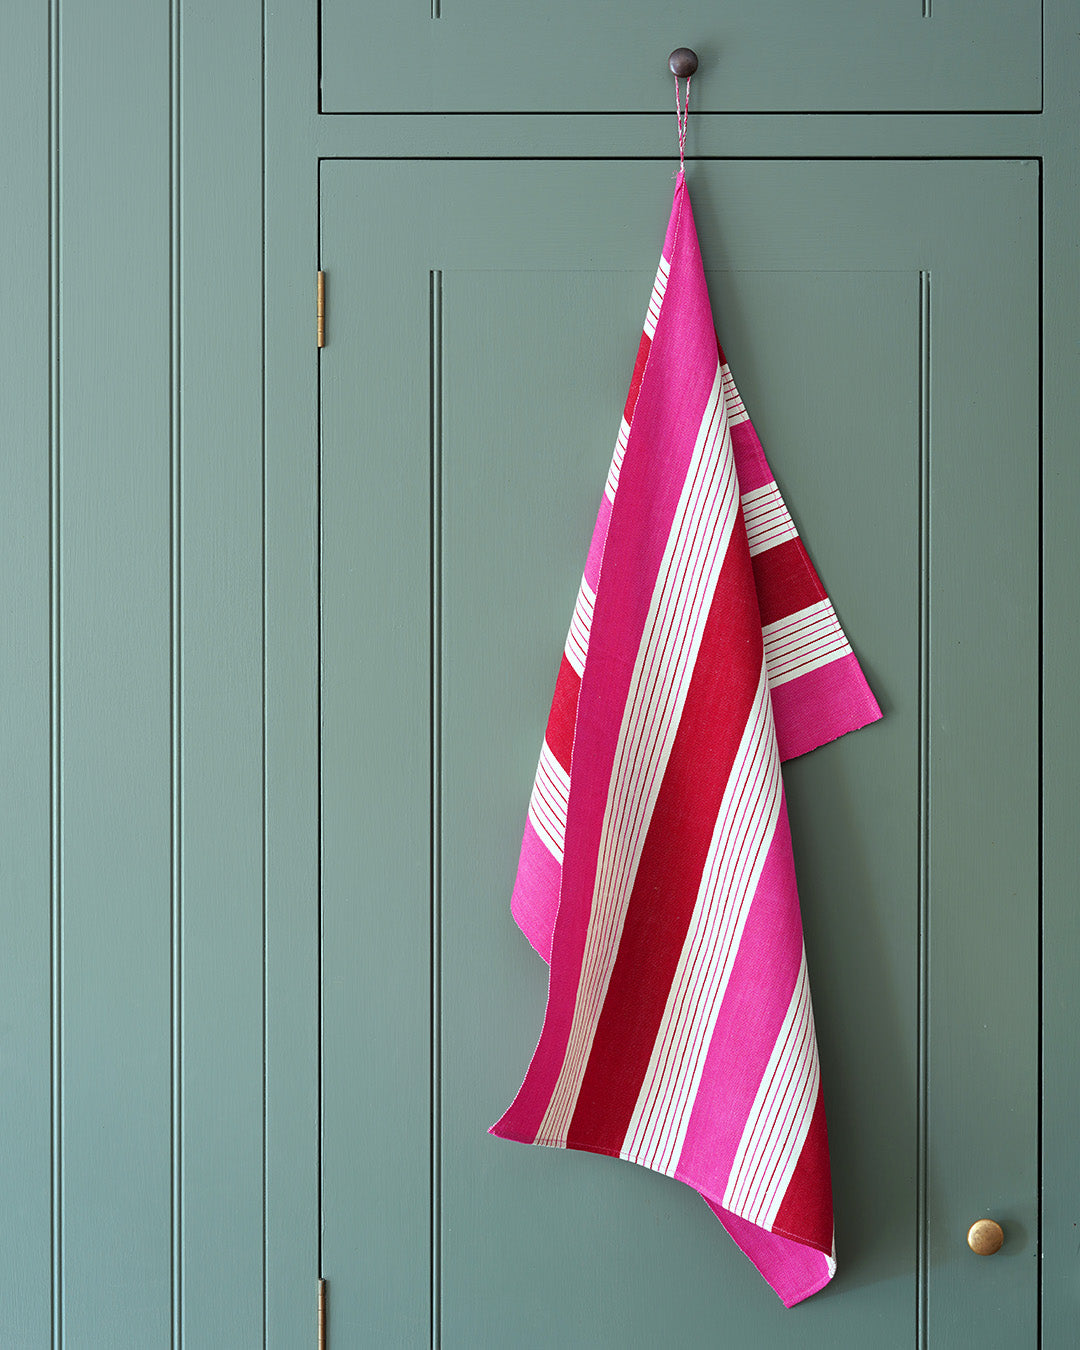 Hot Stripes Hand Towel - Red, Pink and Cream Stripes